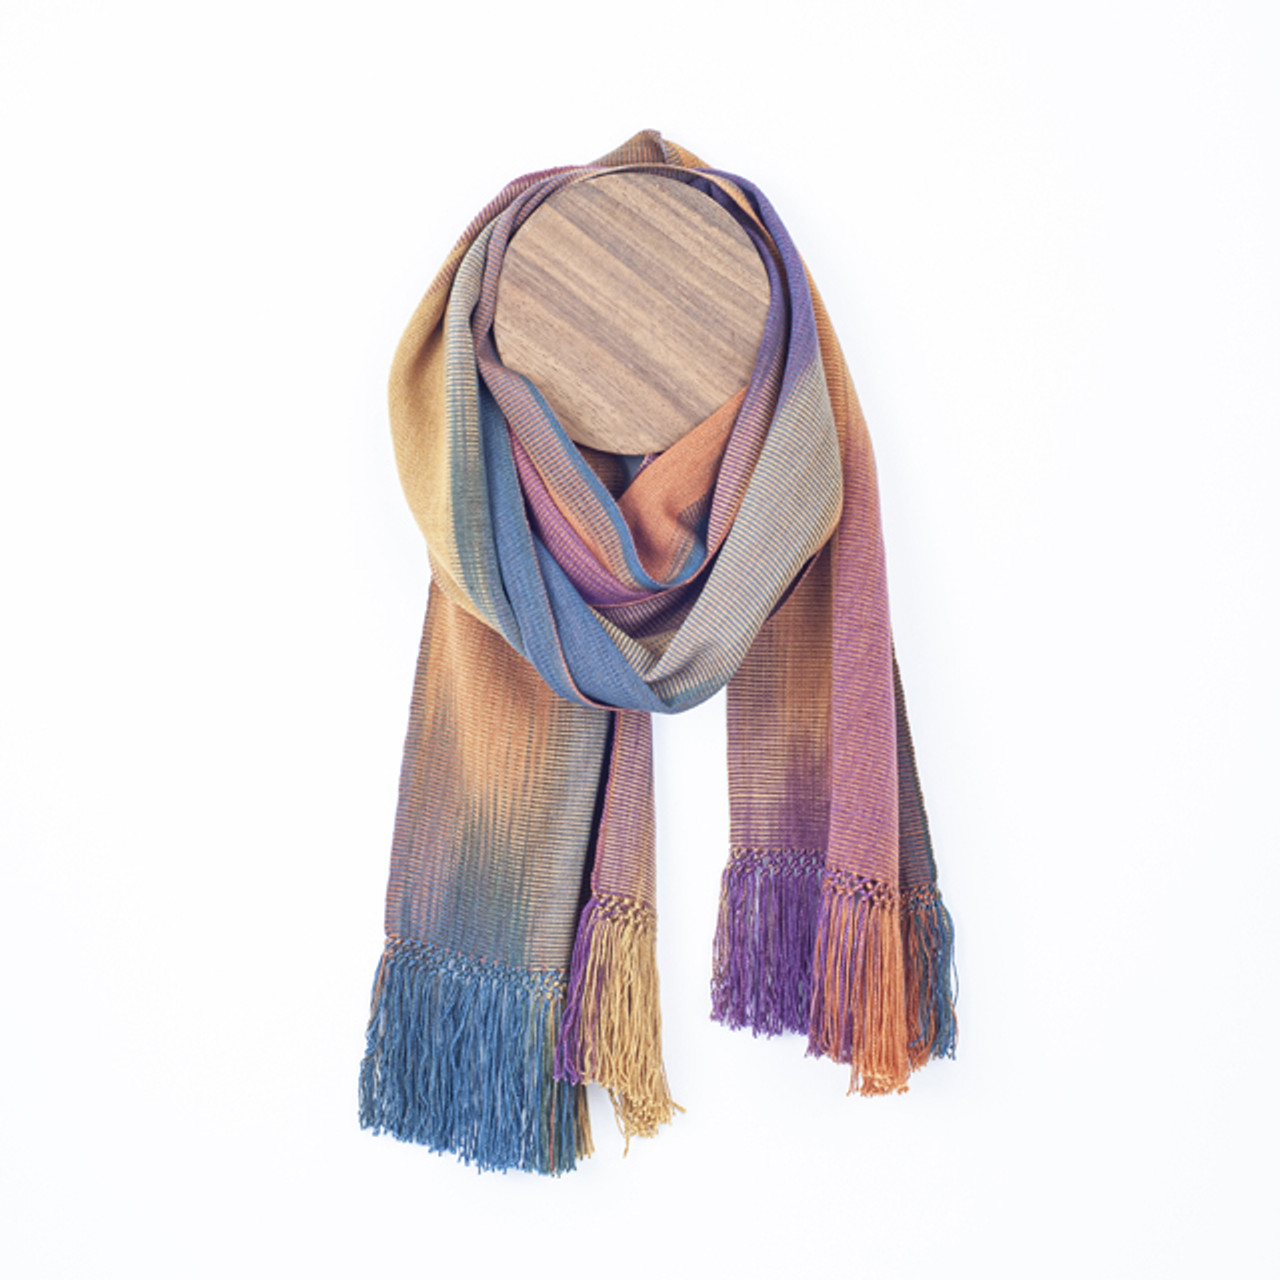 Handwoven Striped Bamboo Chenille Infinity Scarf